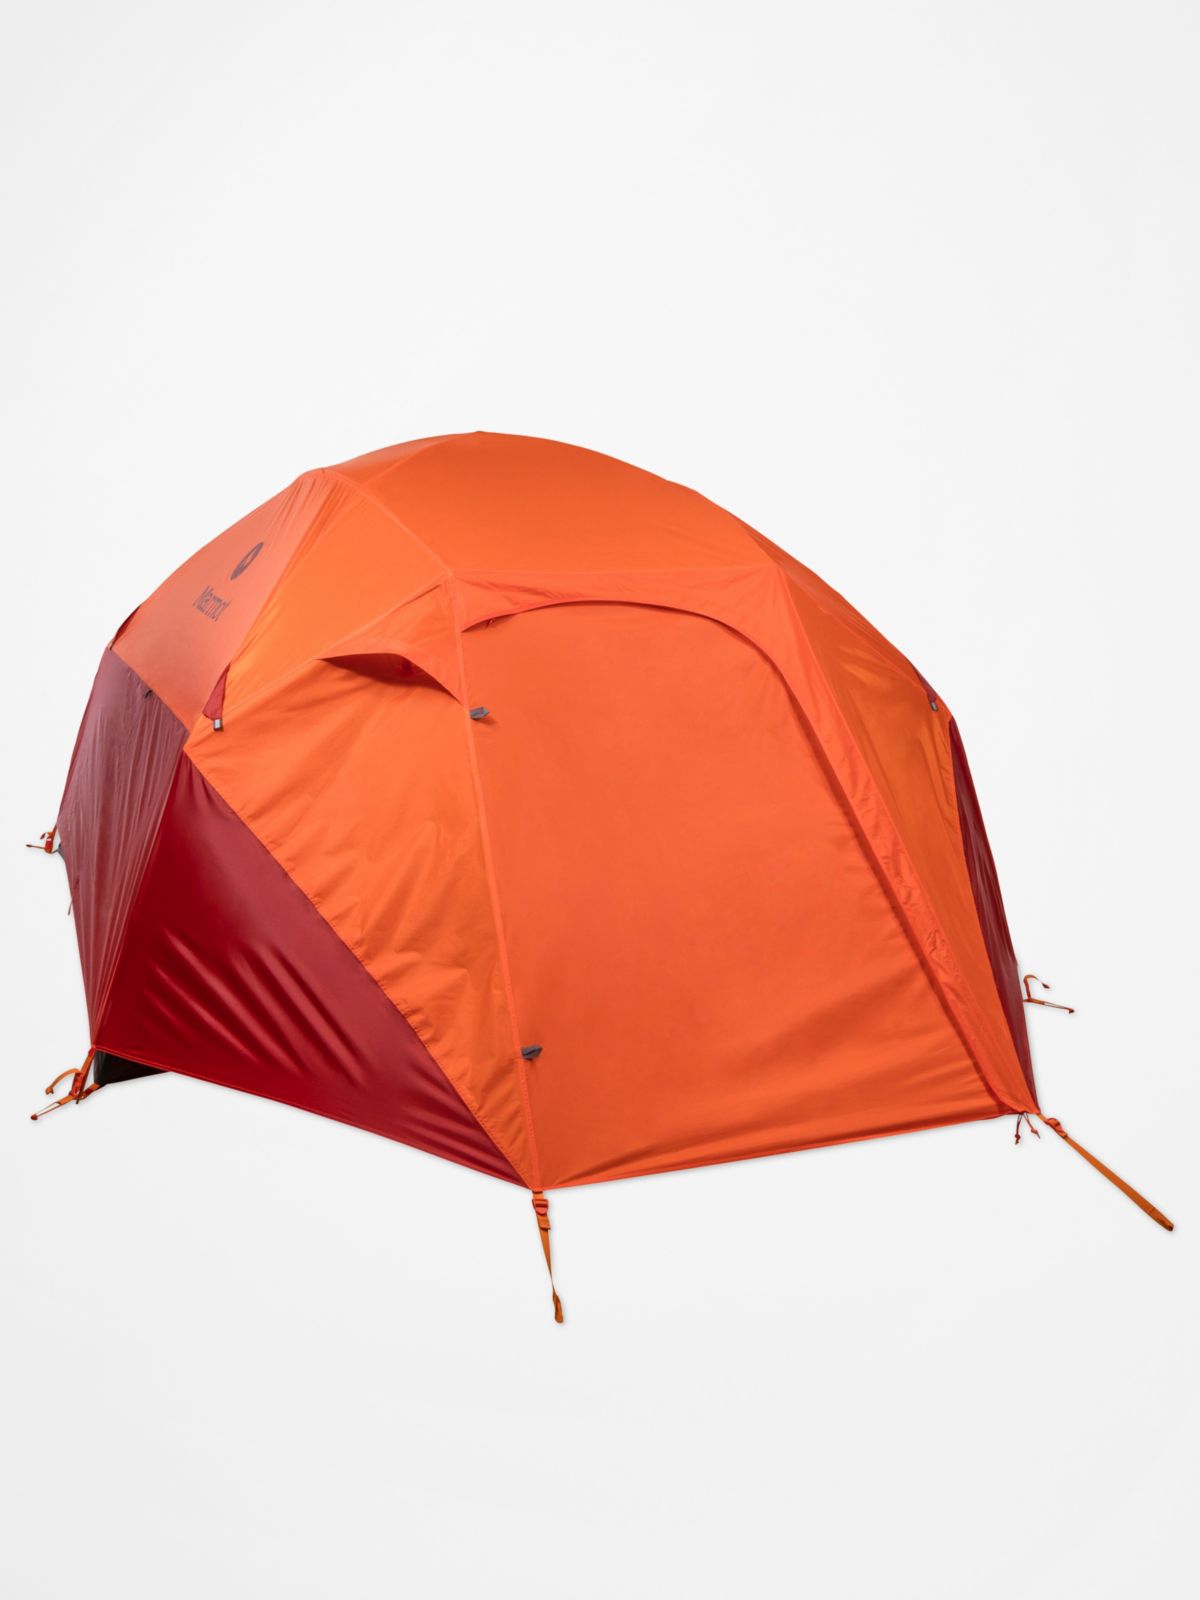 Limelight 4-Person Tent